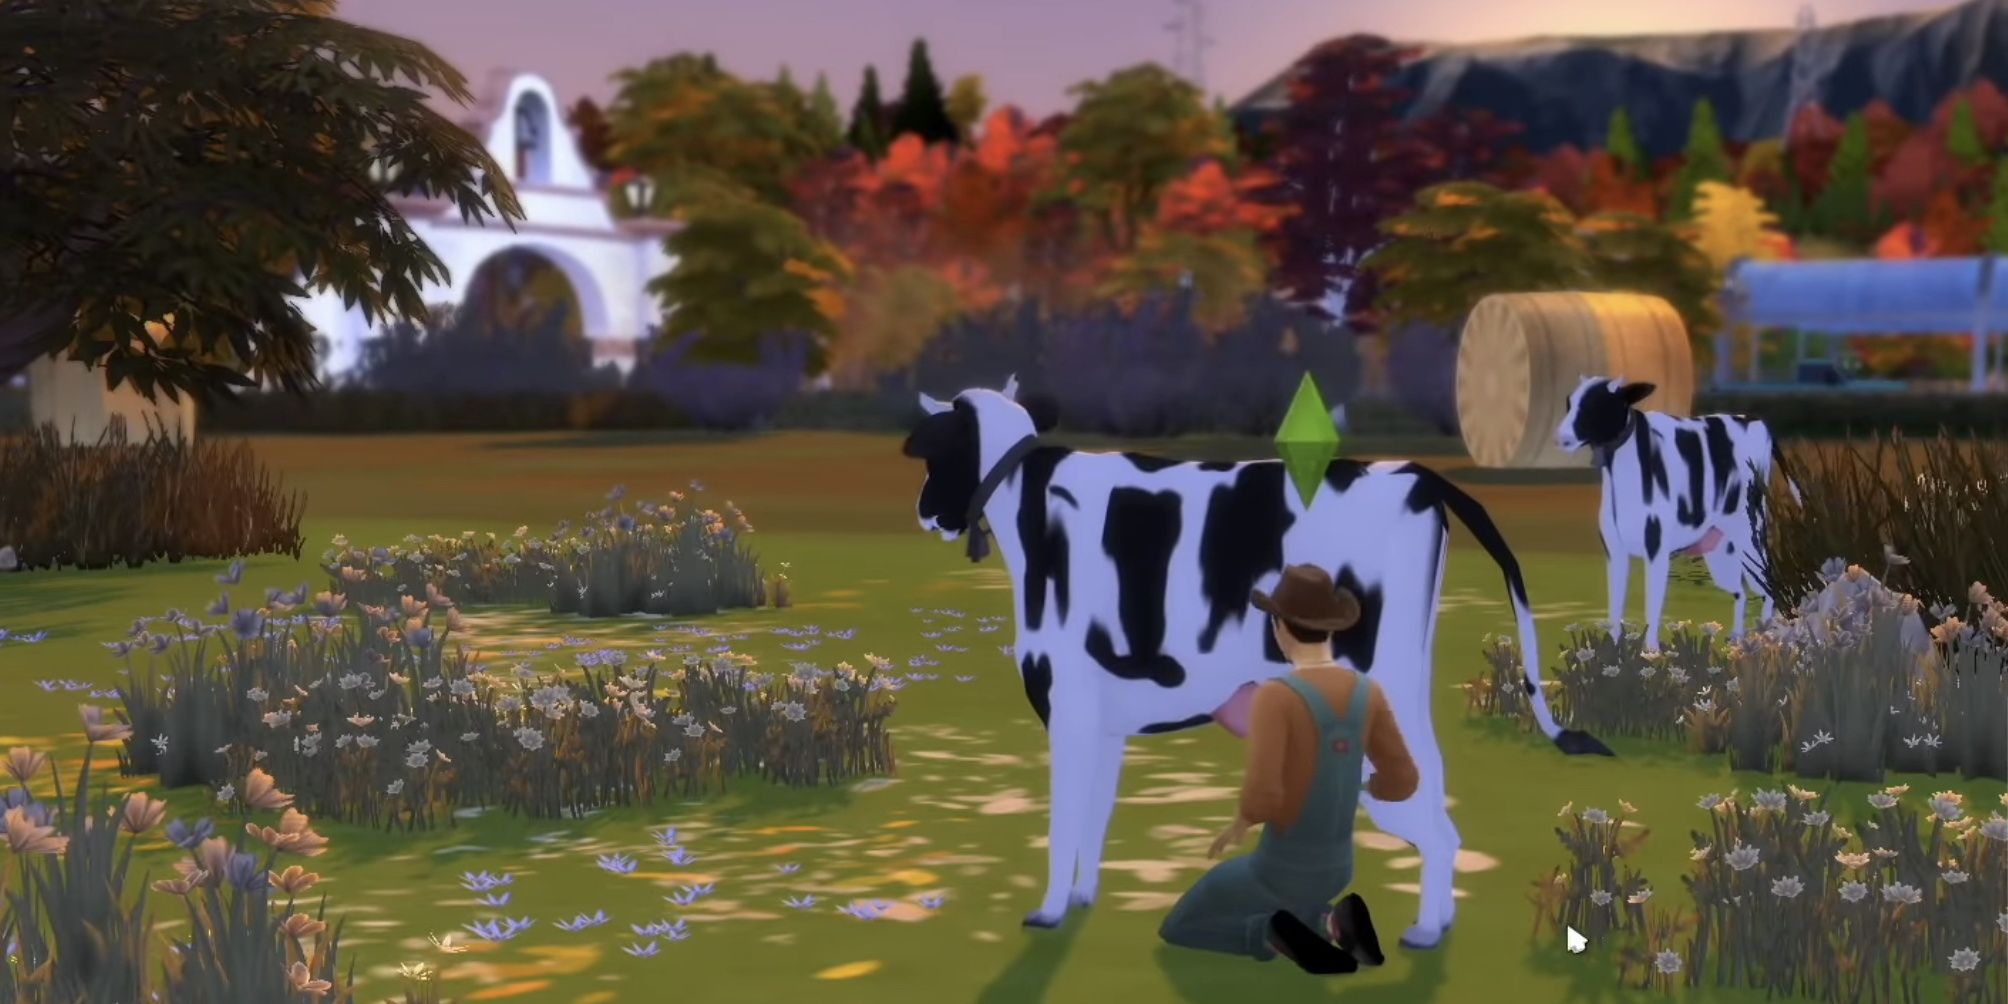 The Sims 4 Farmland mod can enhance or replace Cottage Living - it's up to  you